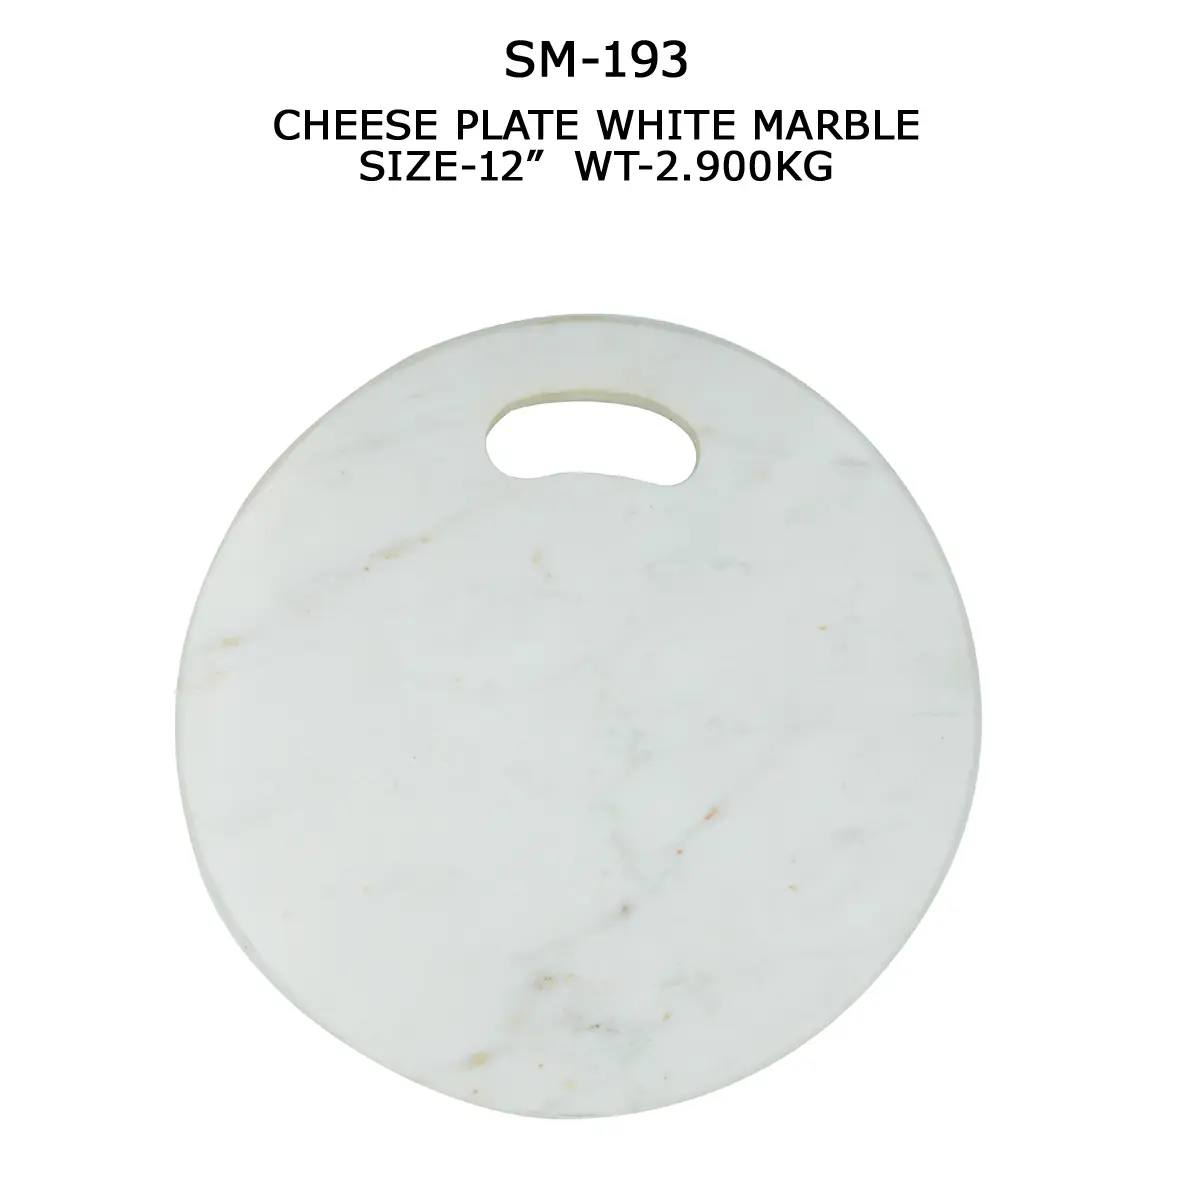 CHEESE PLATE WHITE MARBLE